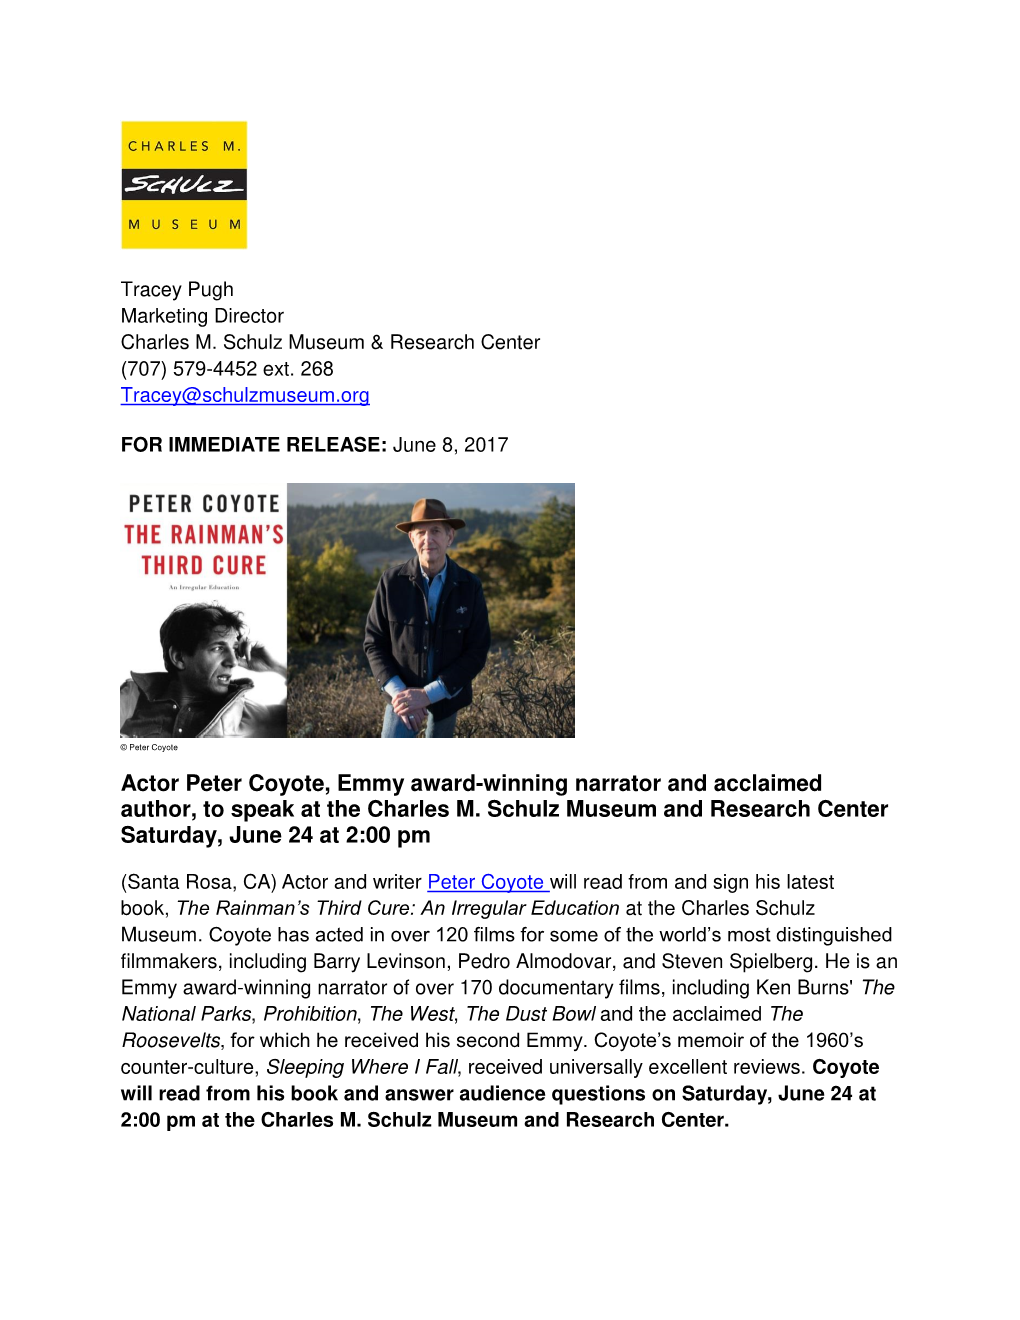 Peter Coyote Actor Peter Coyote, Emmy Award-Winning Narrator and Acclaimed Author, to Speak at the Charles M